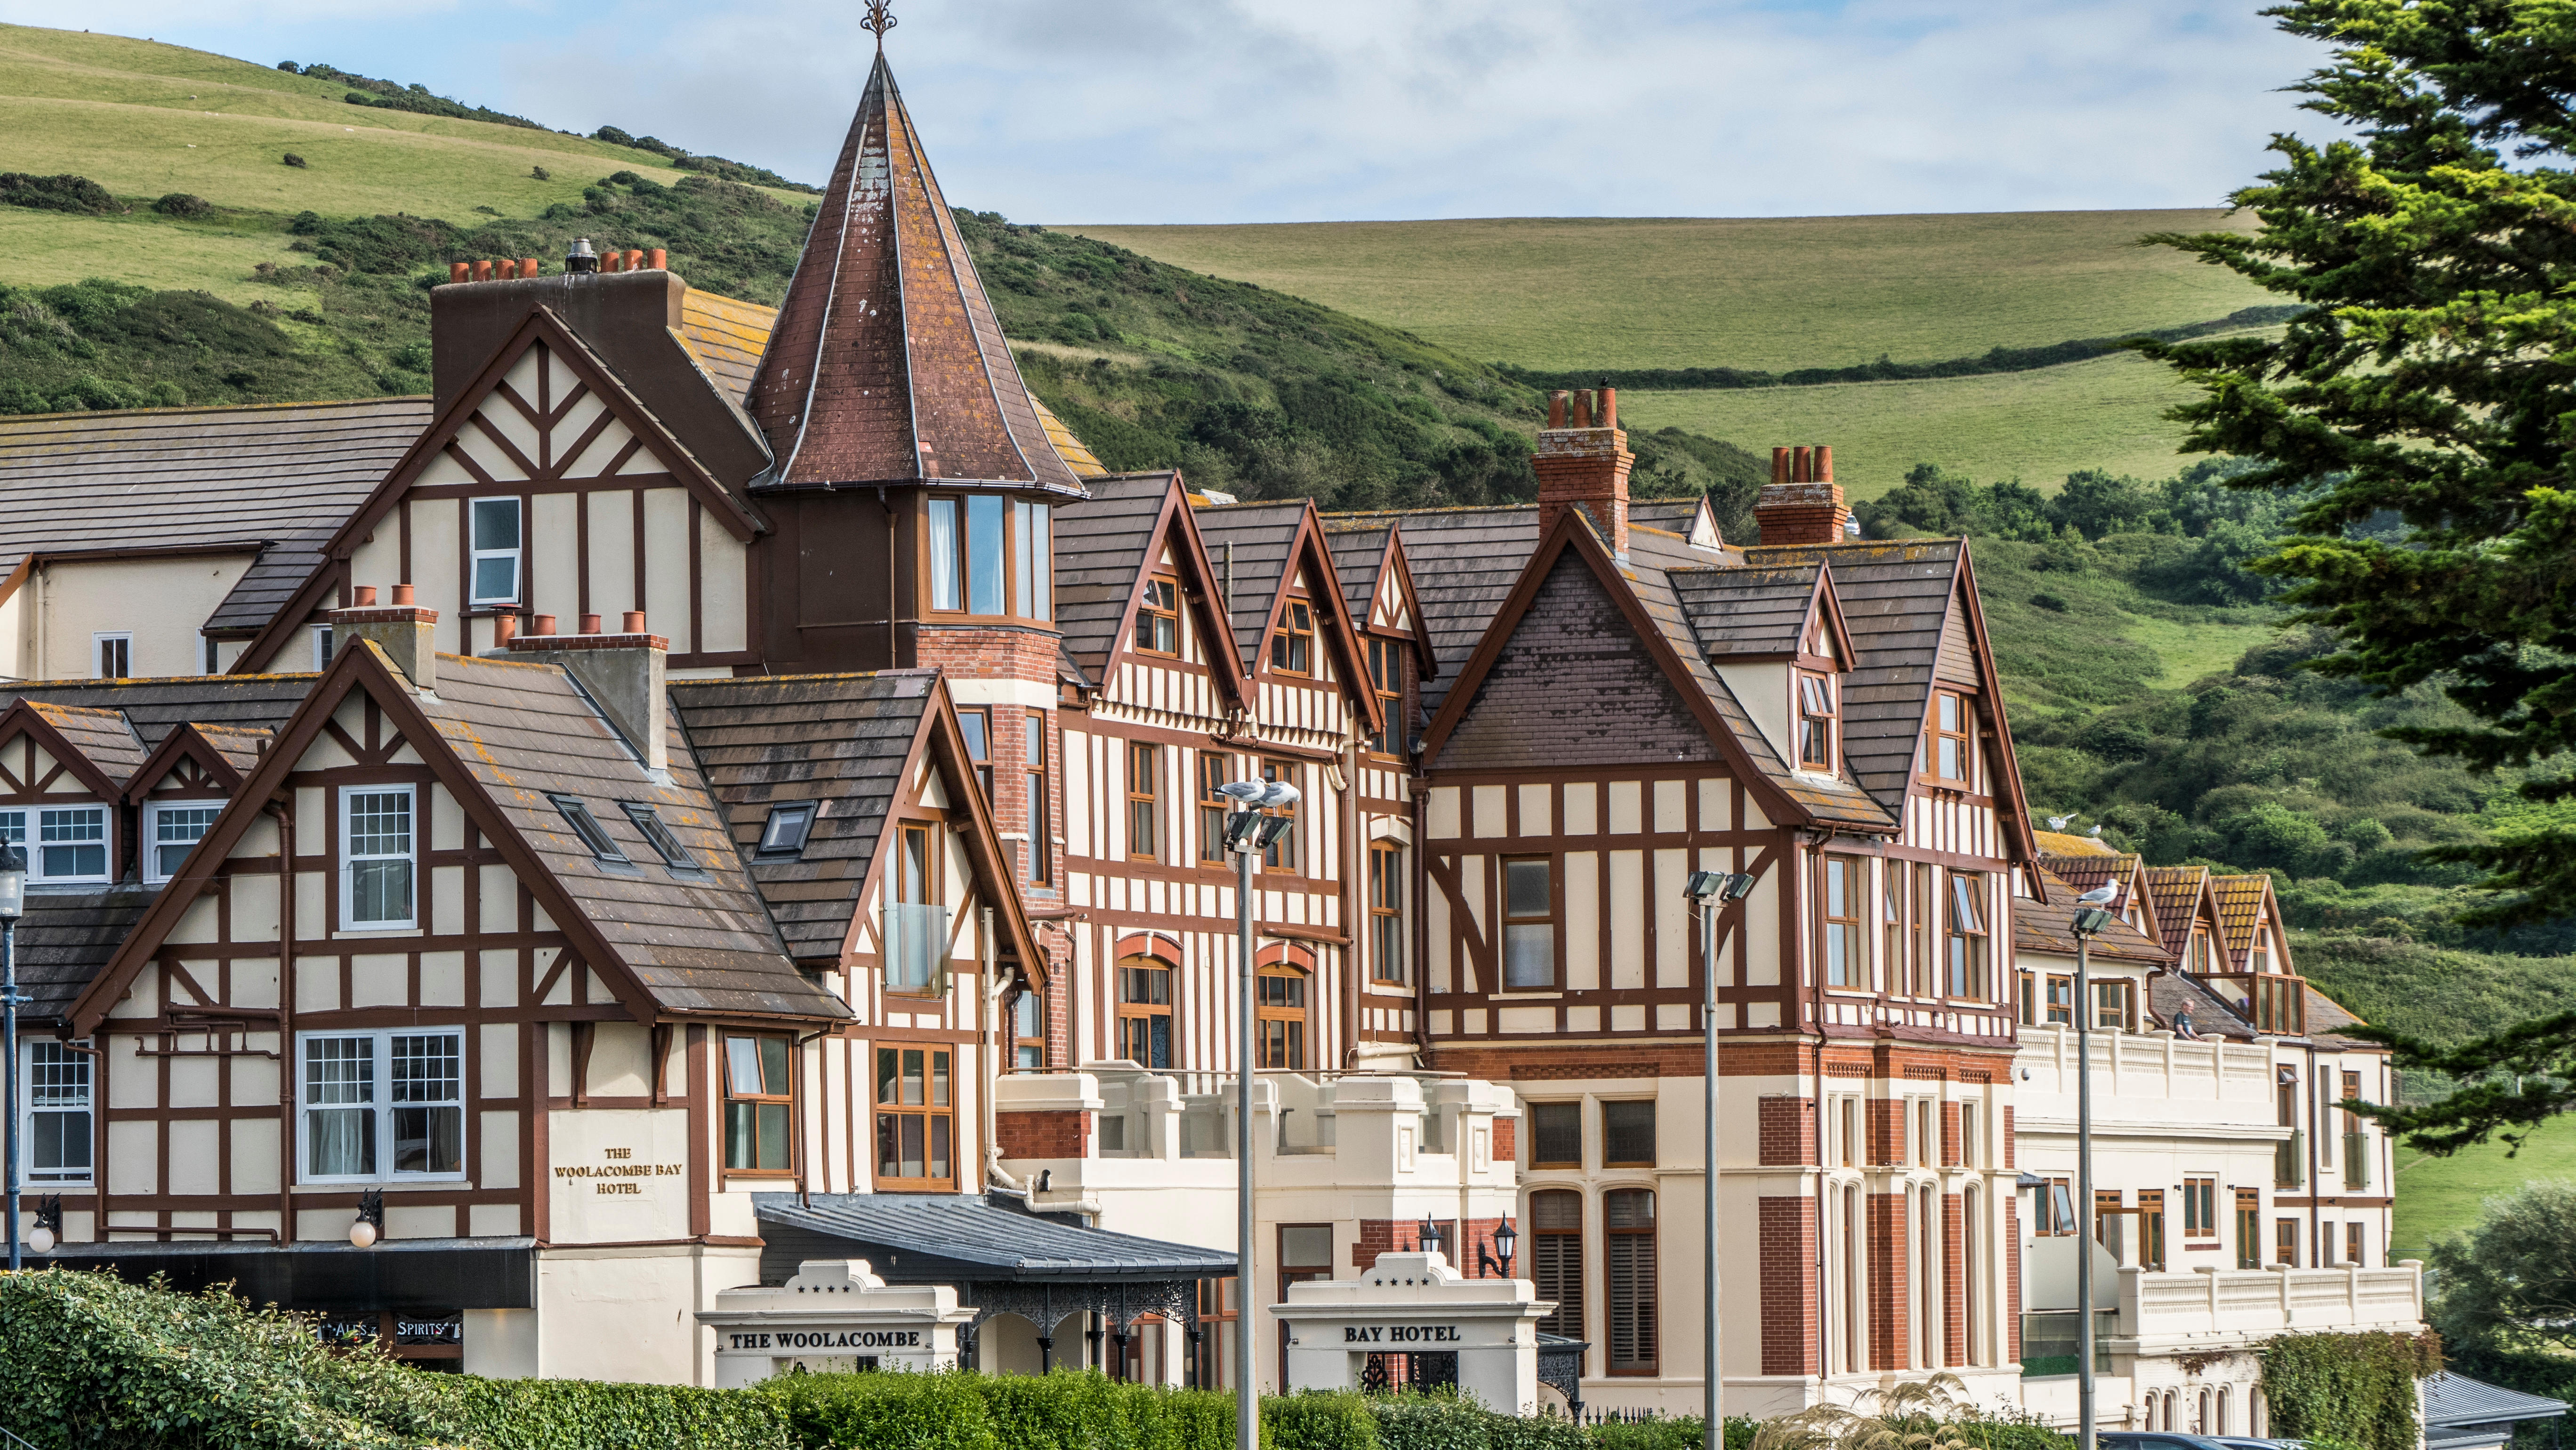 Discover 16 Luxury Hotels In Devon By The Sea For Your Next Holiday